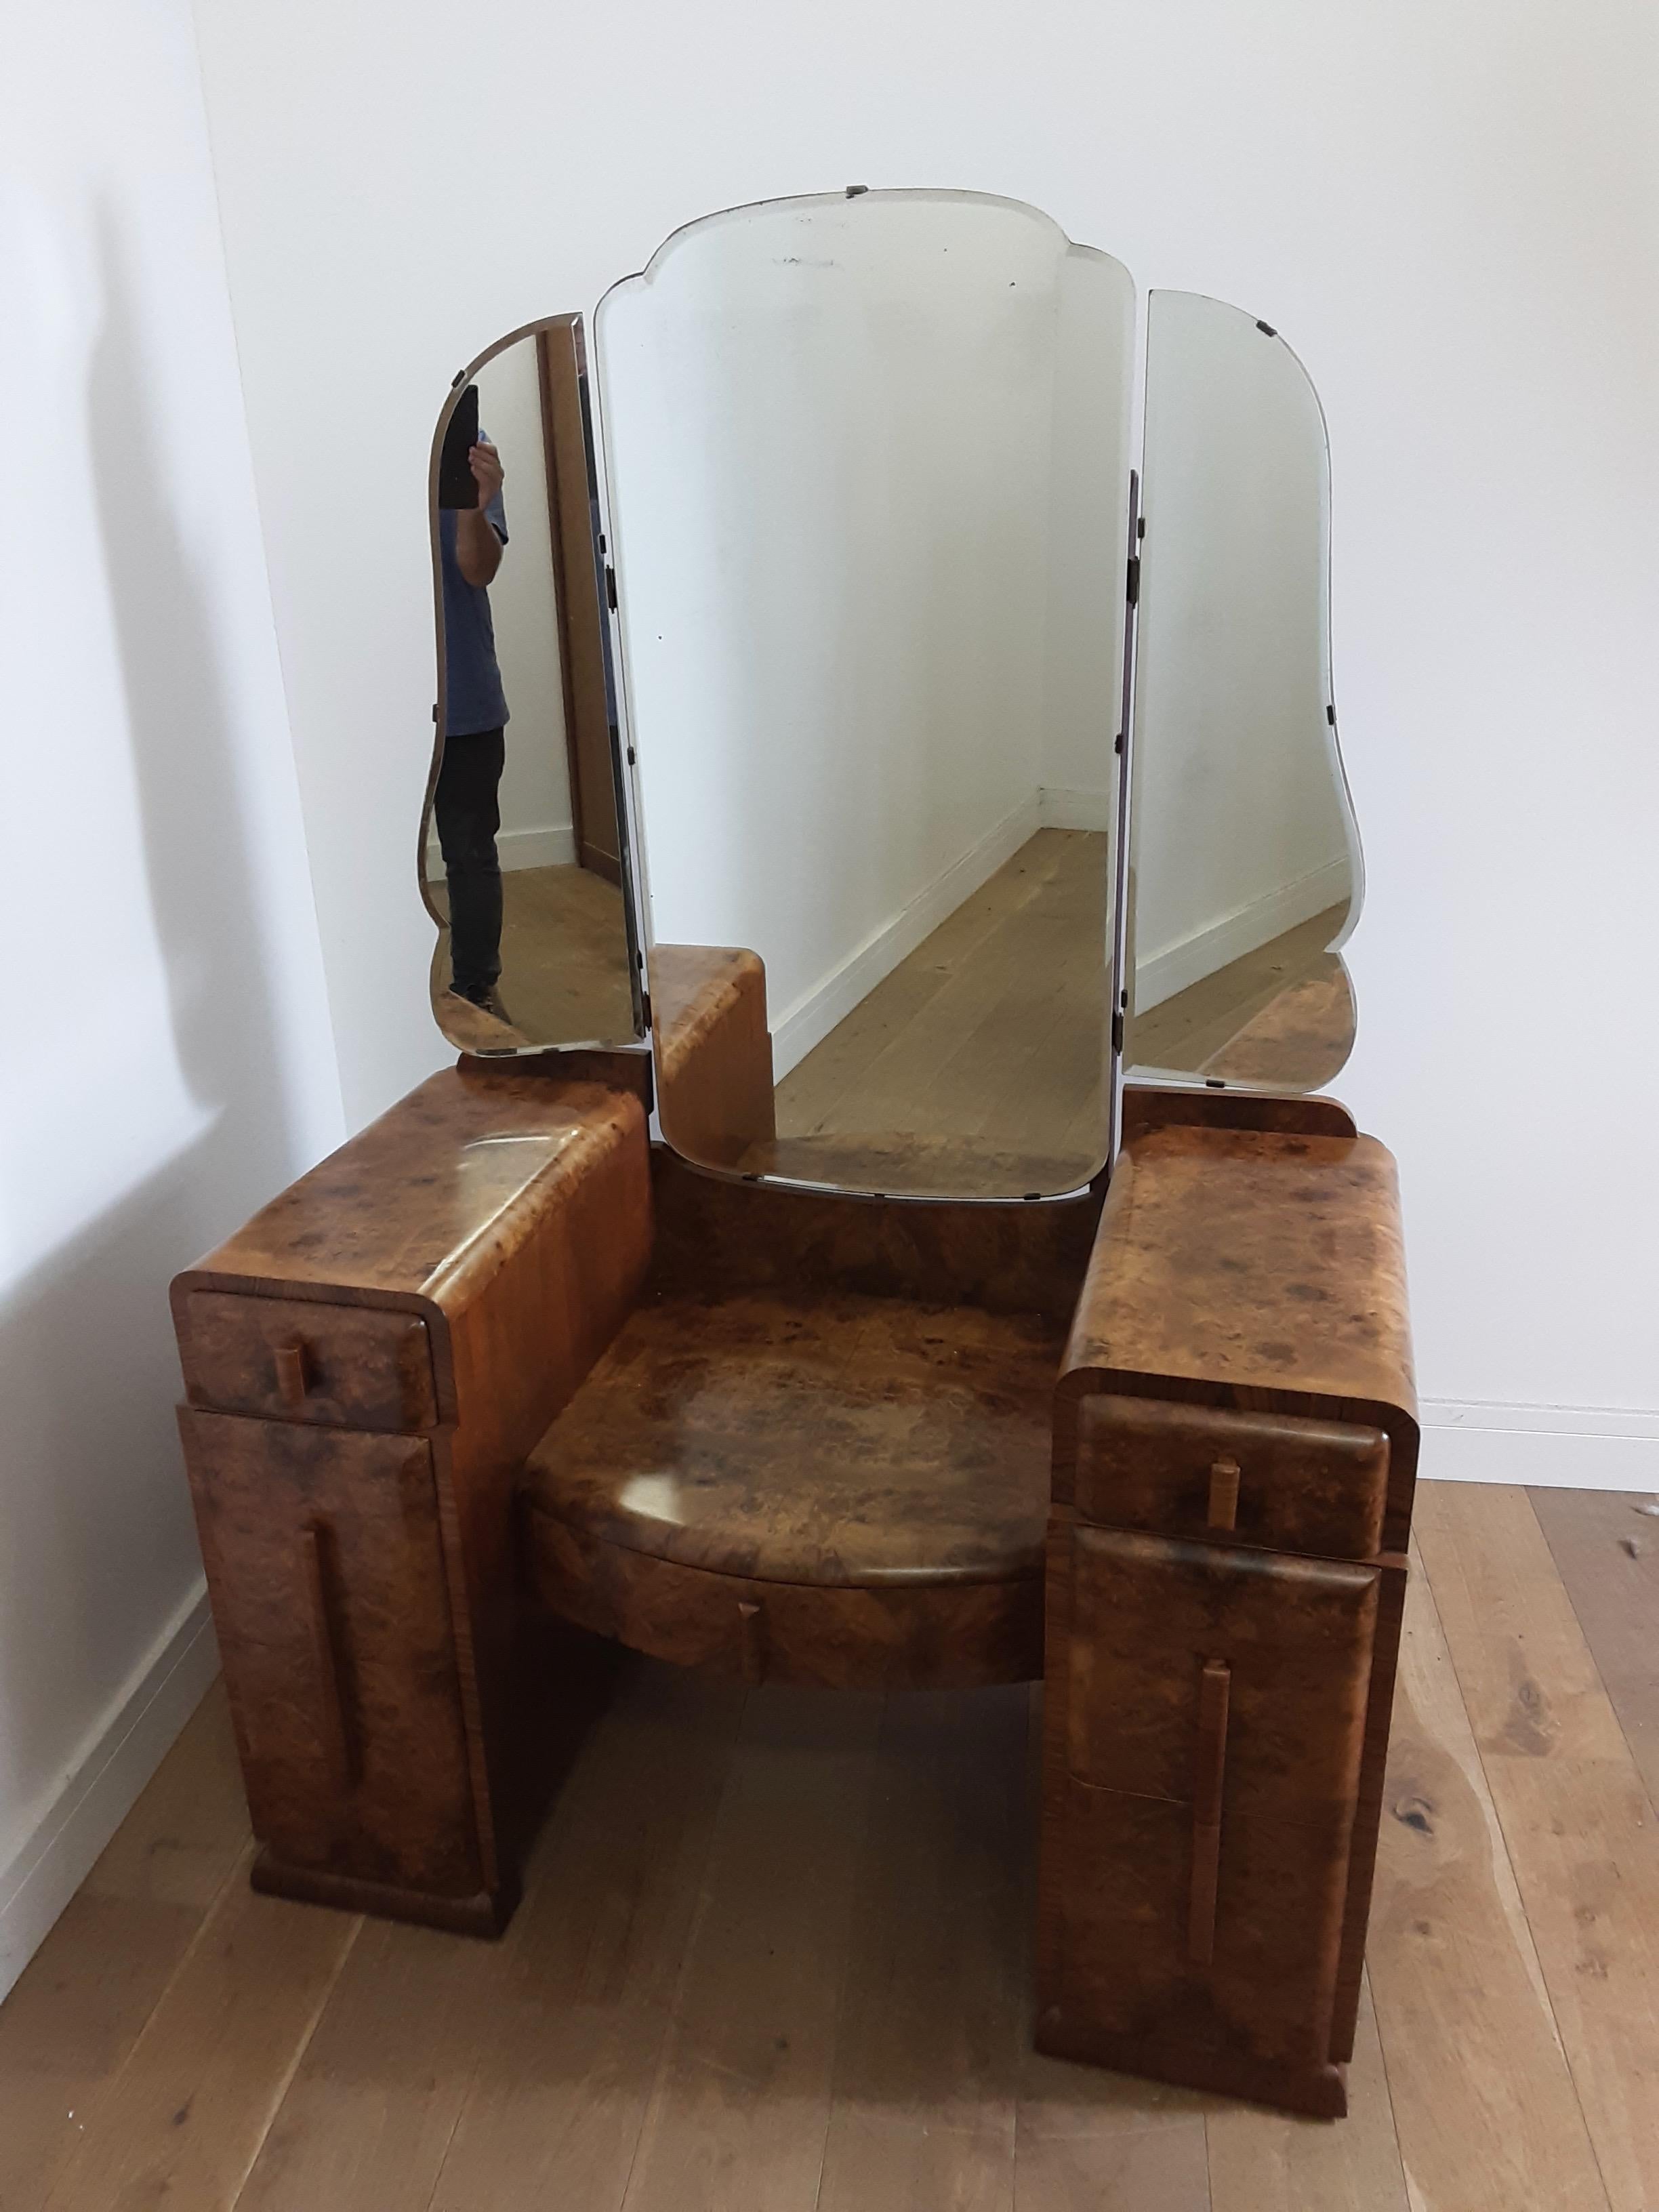 Art deco dressing table in a stunning figured walnut with cloud shape mirror, by Grange furnishing stores, London.
Dressing table is 160 cm H, 71 cm H at the sides, 47 cm H centre, 109 cm W
British, circa 1930.